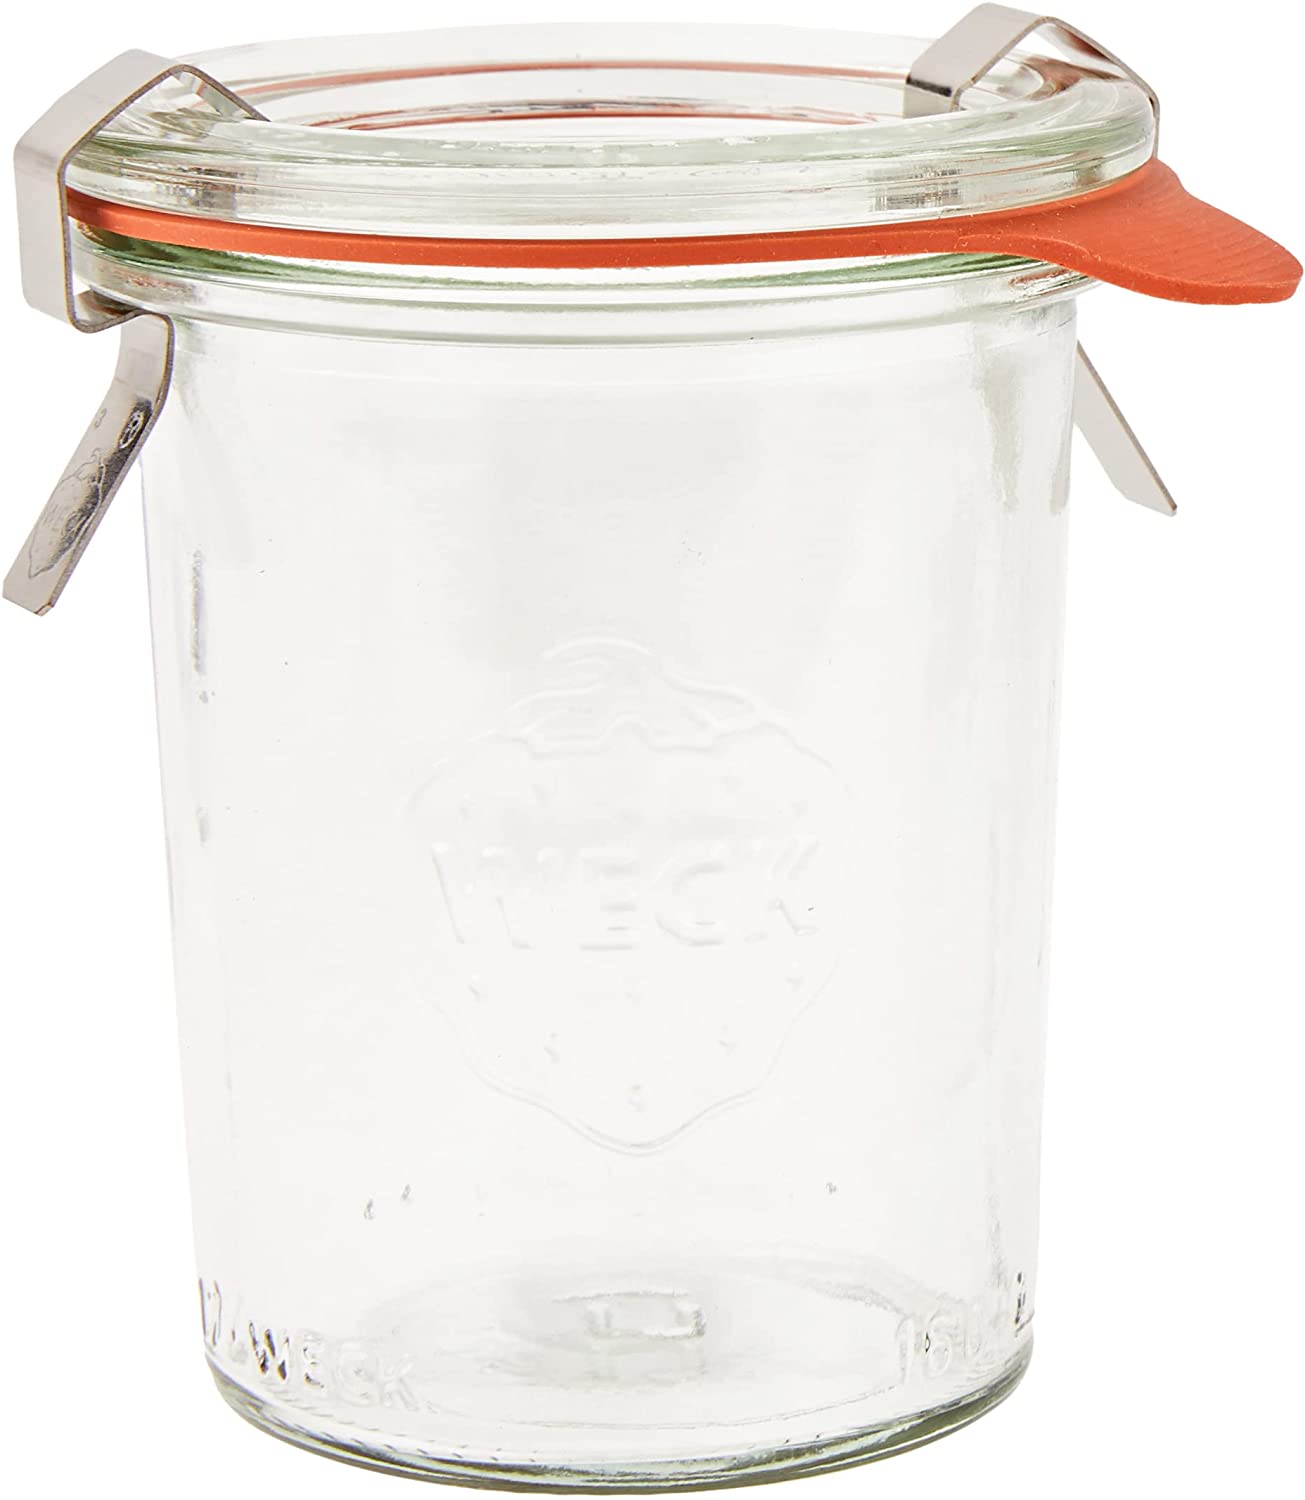 Weck 12 Glass Preserving Jars with Rubber Seal Clips and Glass Lid of 12